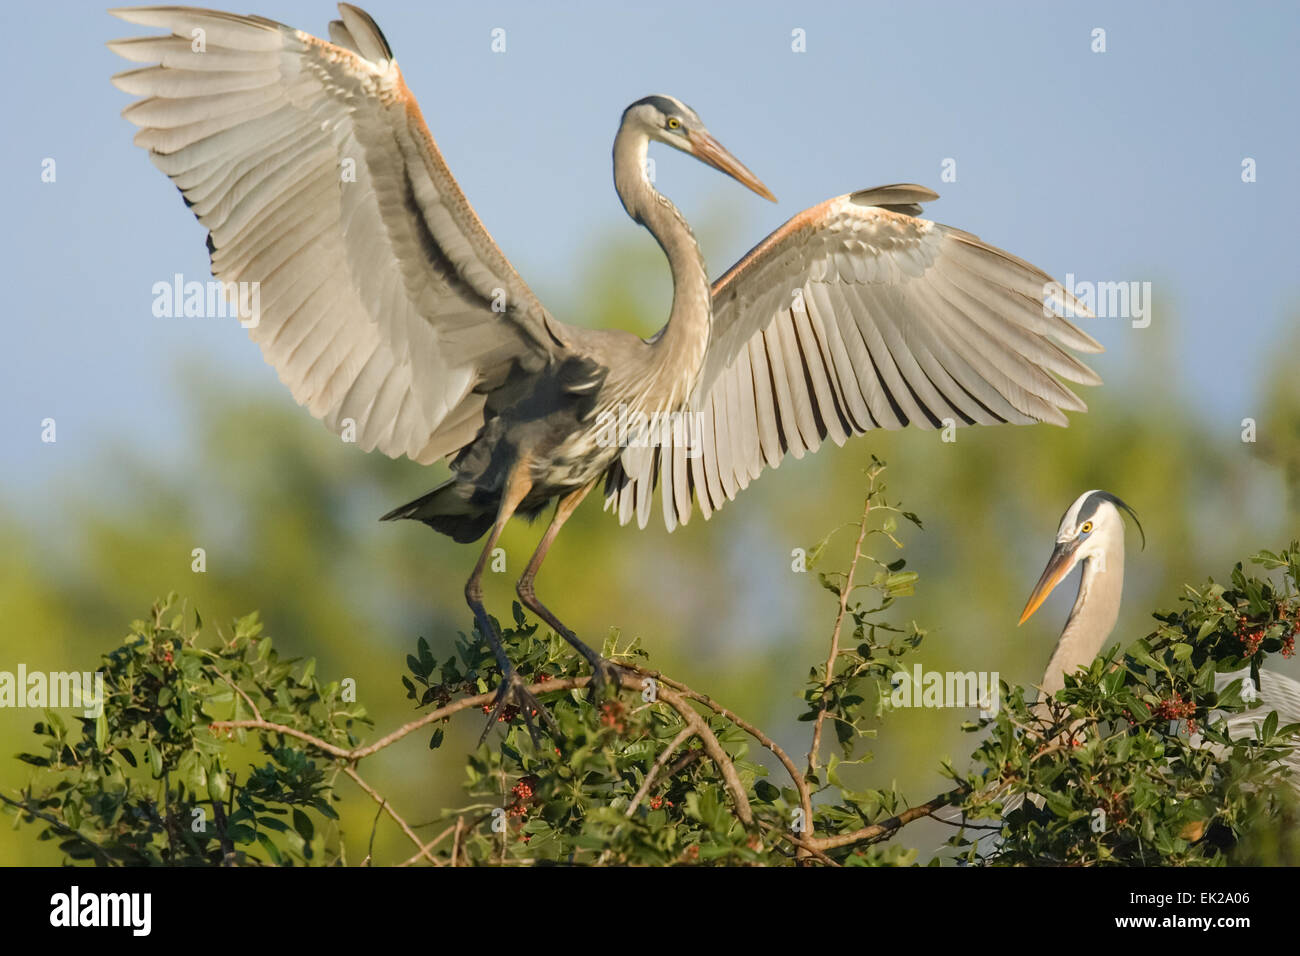 Great Blue Heron with wings outspread in Venice Audubon Rookery, Venice, Florida, USA Stock Photo